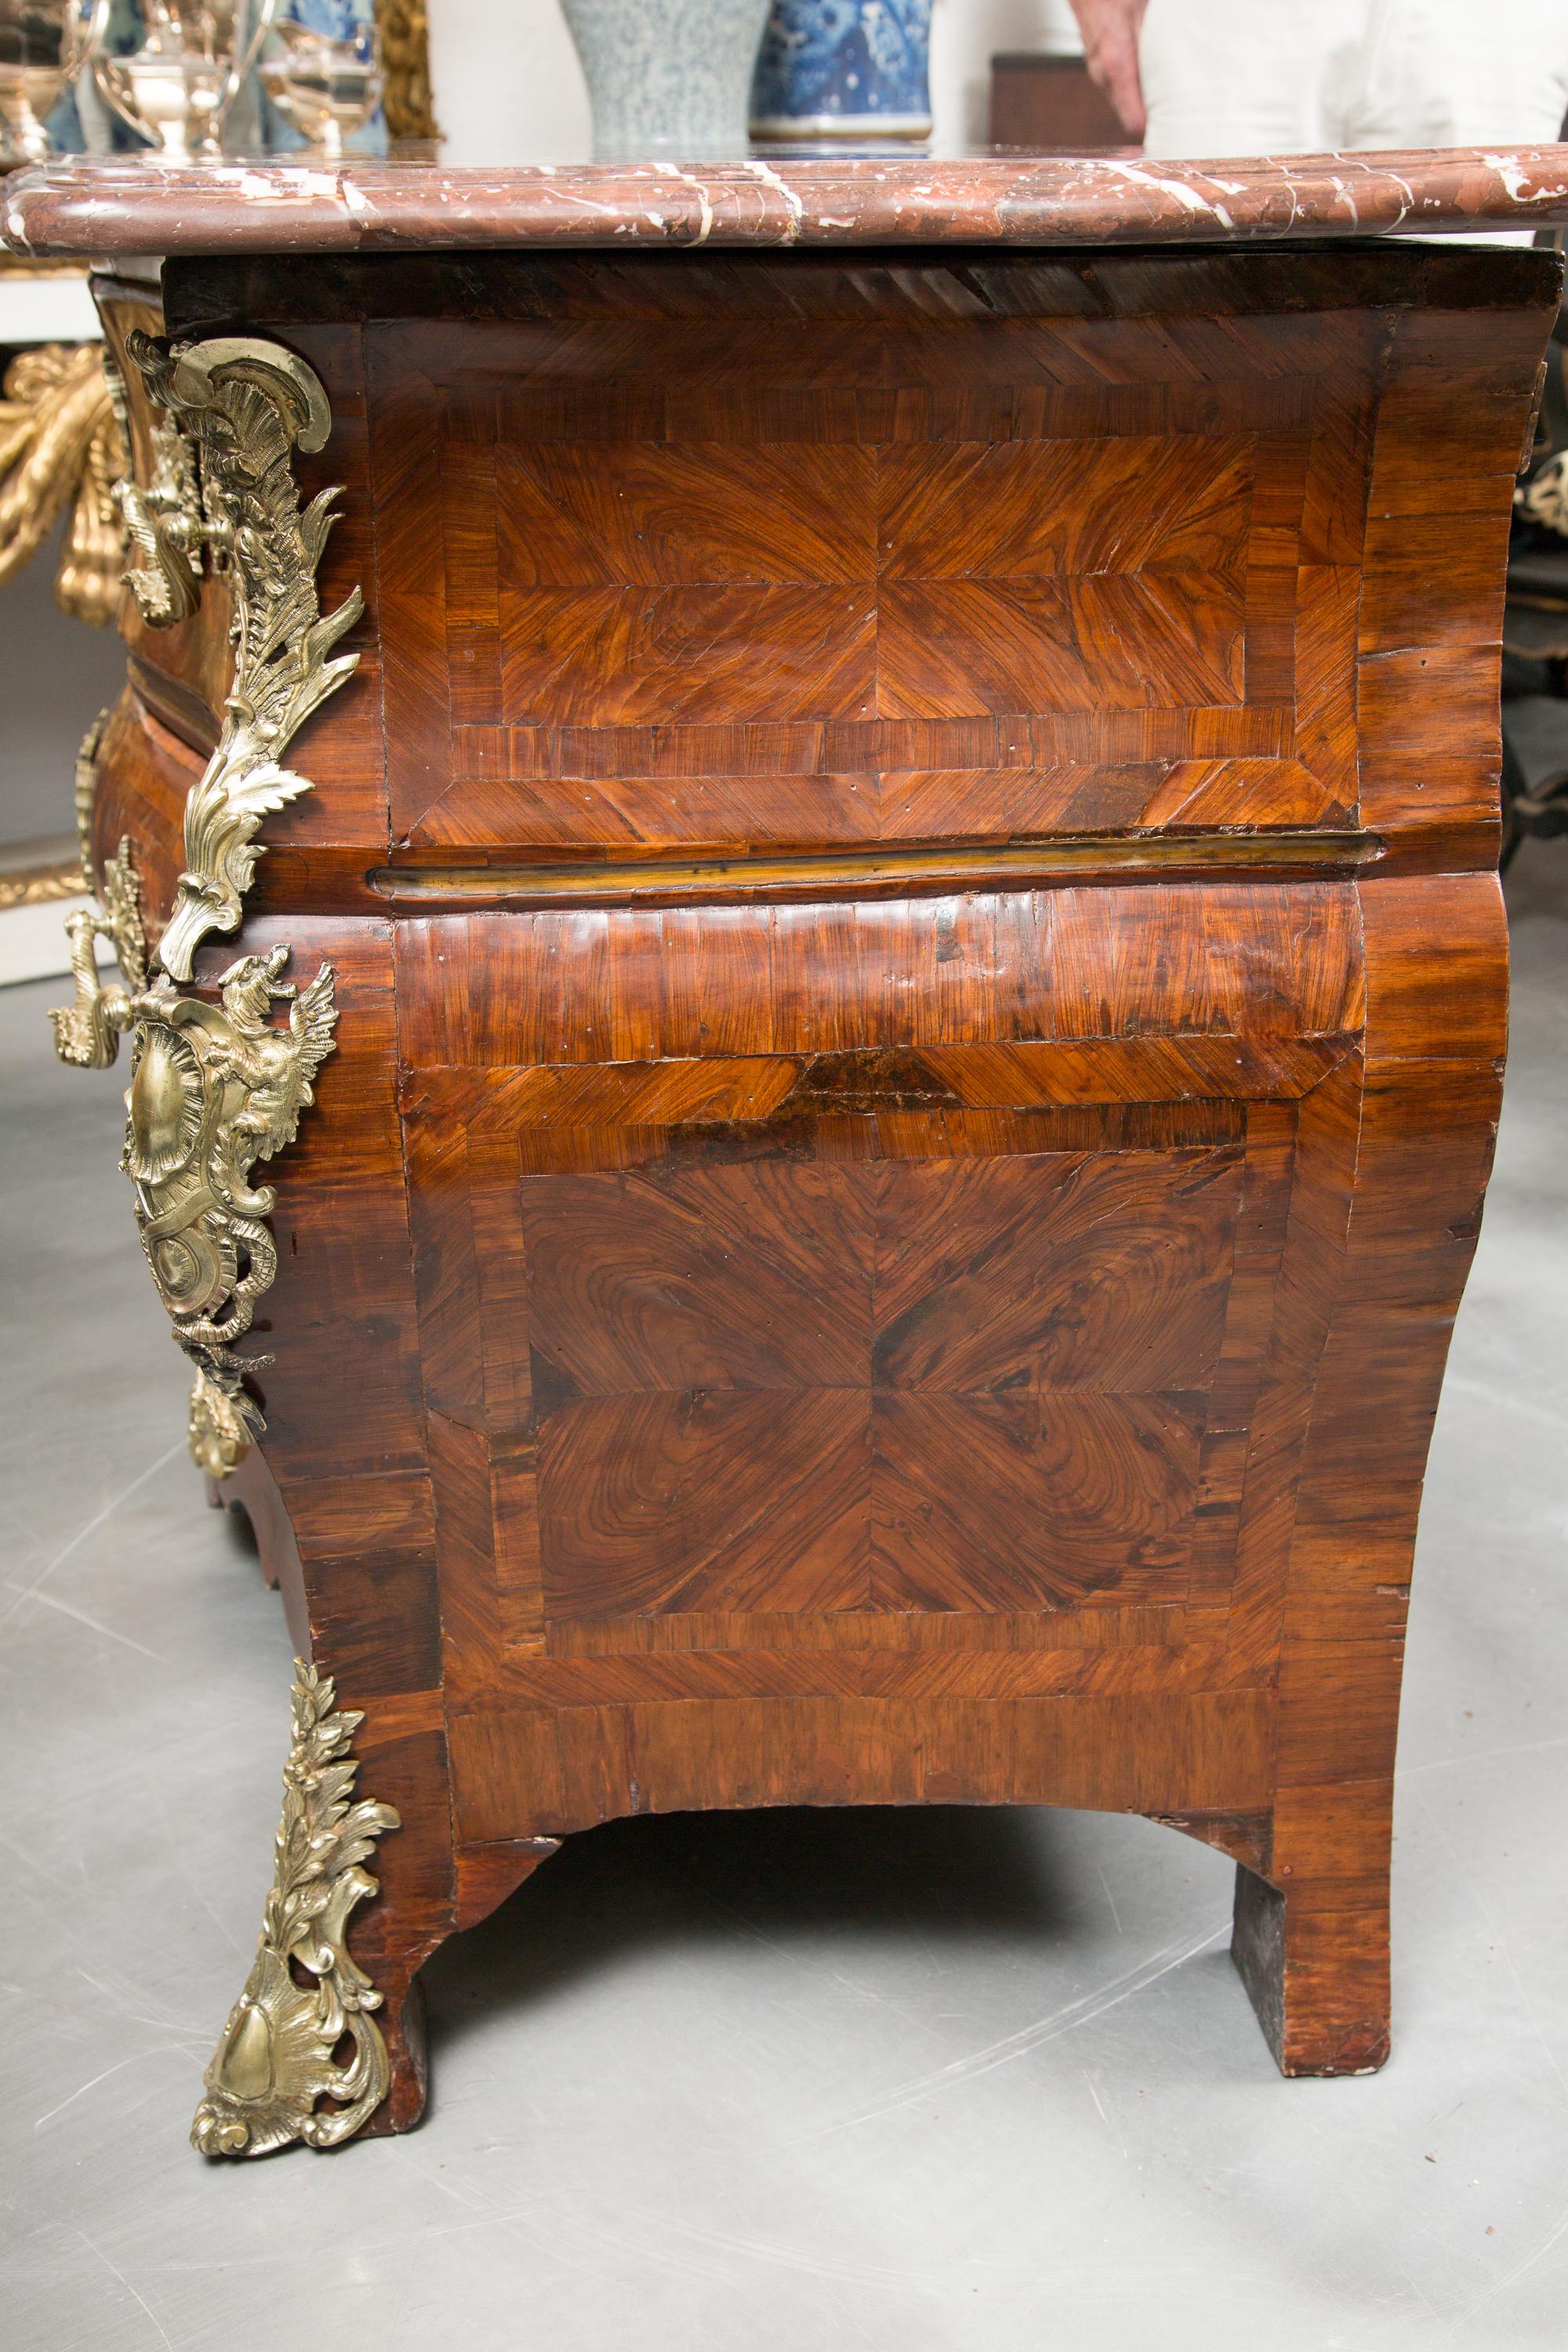 This is an impressive 18th century Louis XV Tulipwood and Kingwood commode with a rouge variegated marble top over three long graduated drawers and overall embellished with ornate gilt bronze metal mounts. On the top left corner of the commode is a